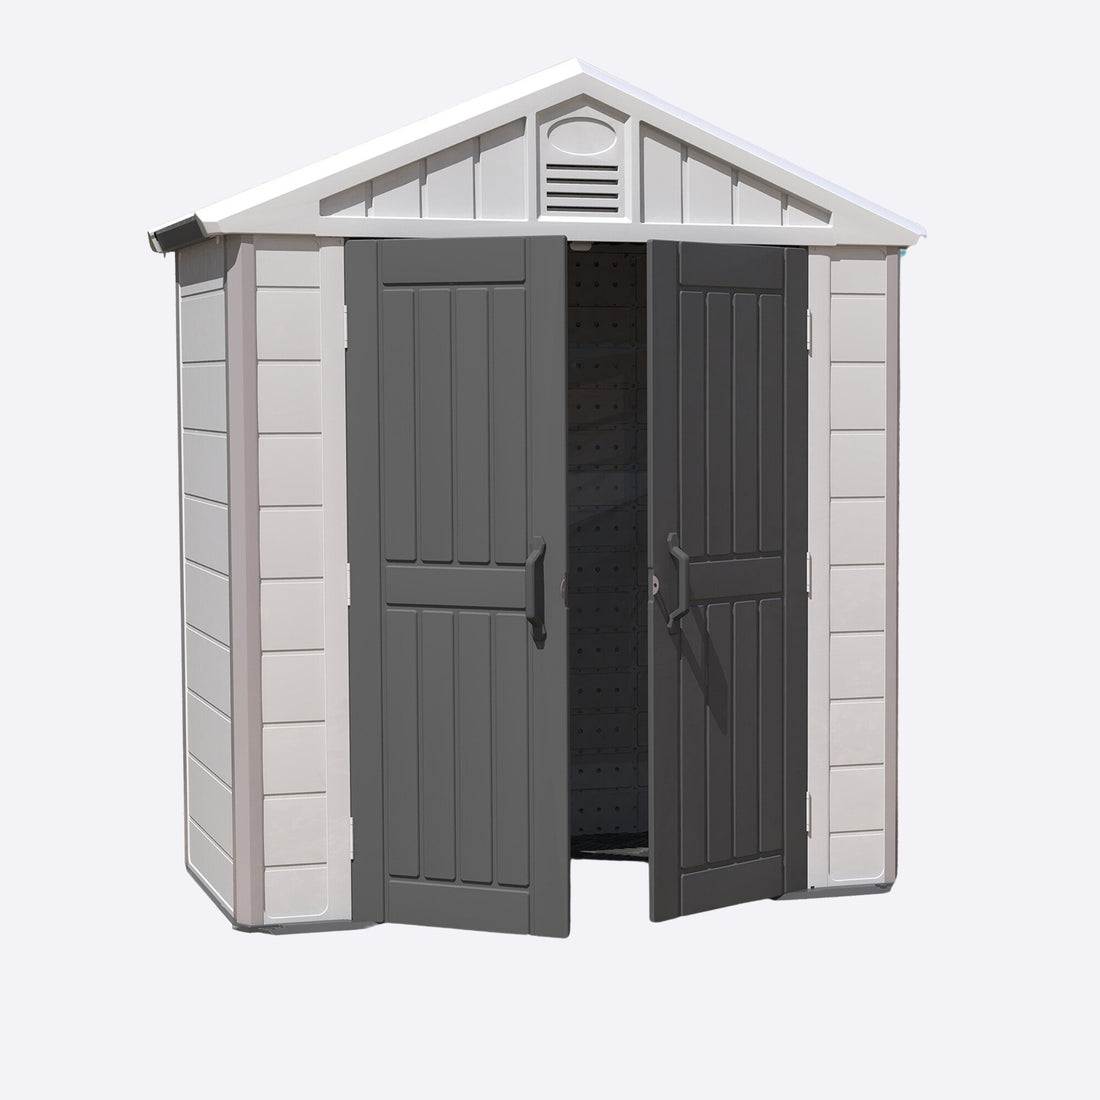 Horti Cubic Walk In Storage Sheds - Horti Cubic